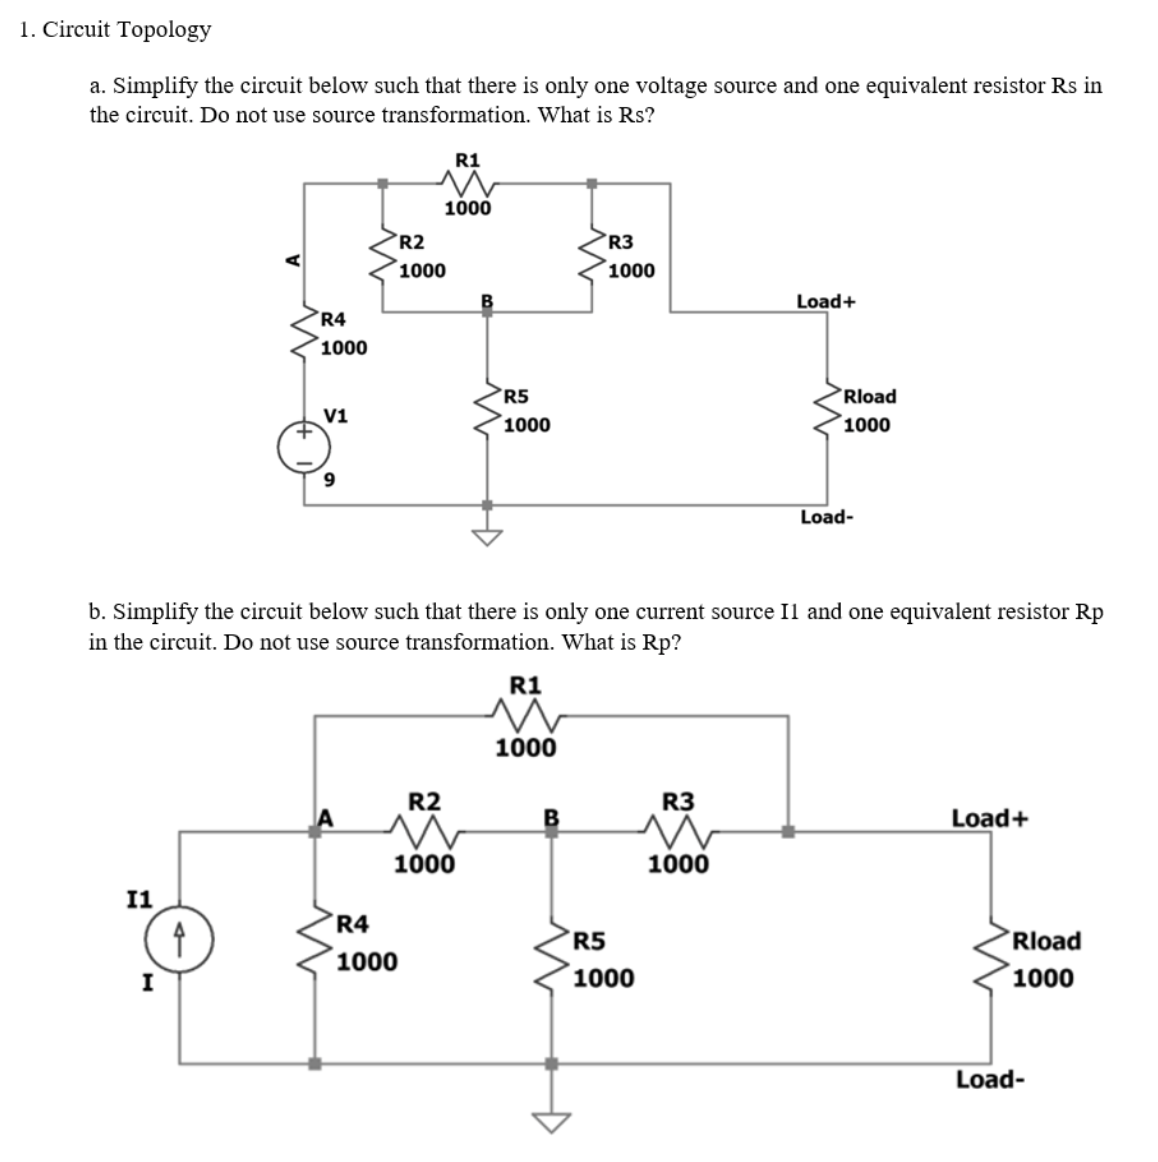 1. Circuit Topology
a. Simplify the circuit below such that there is only one voltage source and one equivalent resistor Rs in
the circuit. Do not use source transformation. What is Rs?
R1
1000
R2
R3
1000
1000
Load+
R4
1000
R5
Rload
V1
´1000
1000
Load-
b. Simplify the circuit below such that there is only one current source Il and one equivalent resistor Rp
in the circuit. Do not use source transformation. What is Rp?
R1
1000
R2
R3
Load+
1000
1000
I1
R4
R5
Rload
1000
I
1000
1000
Load-
